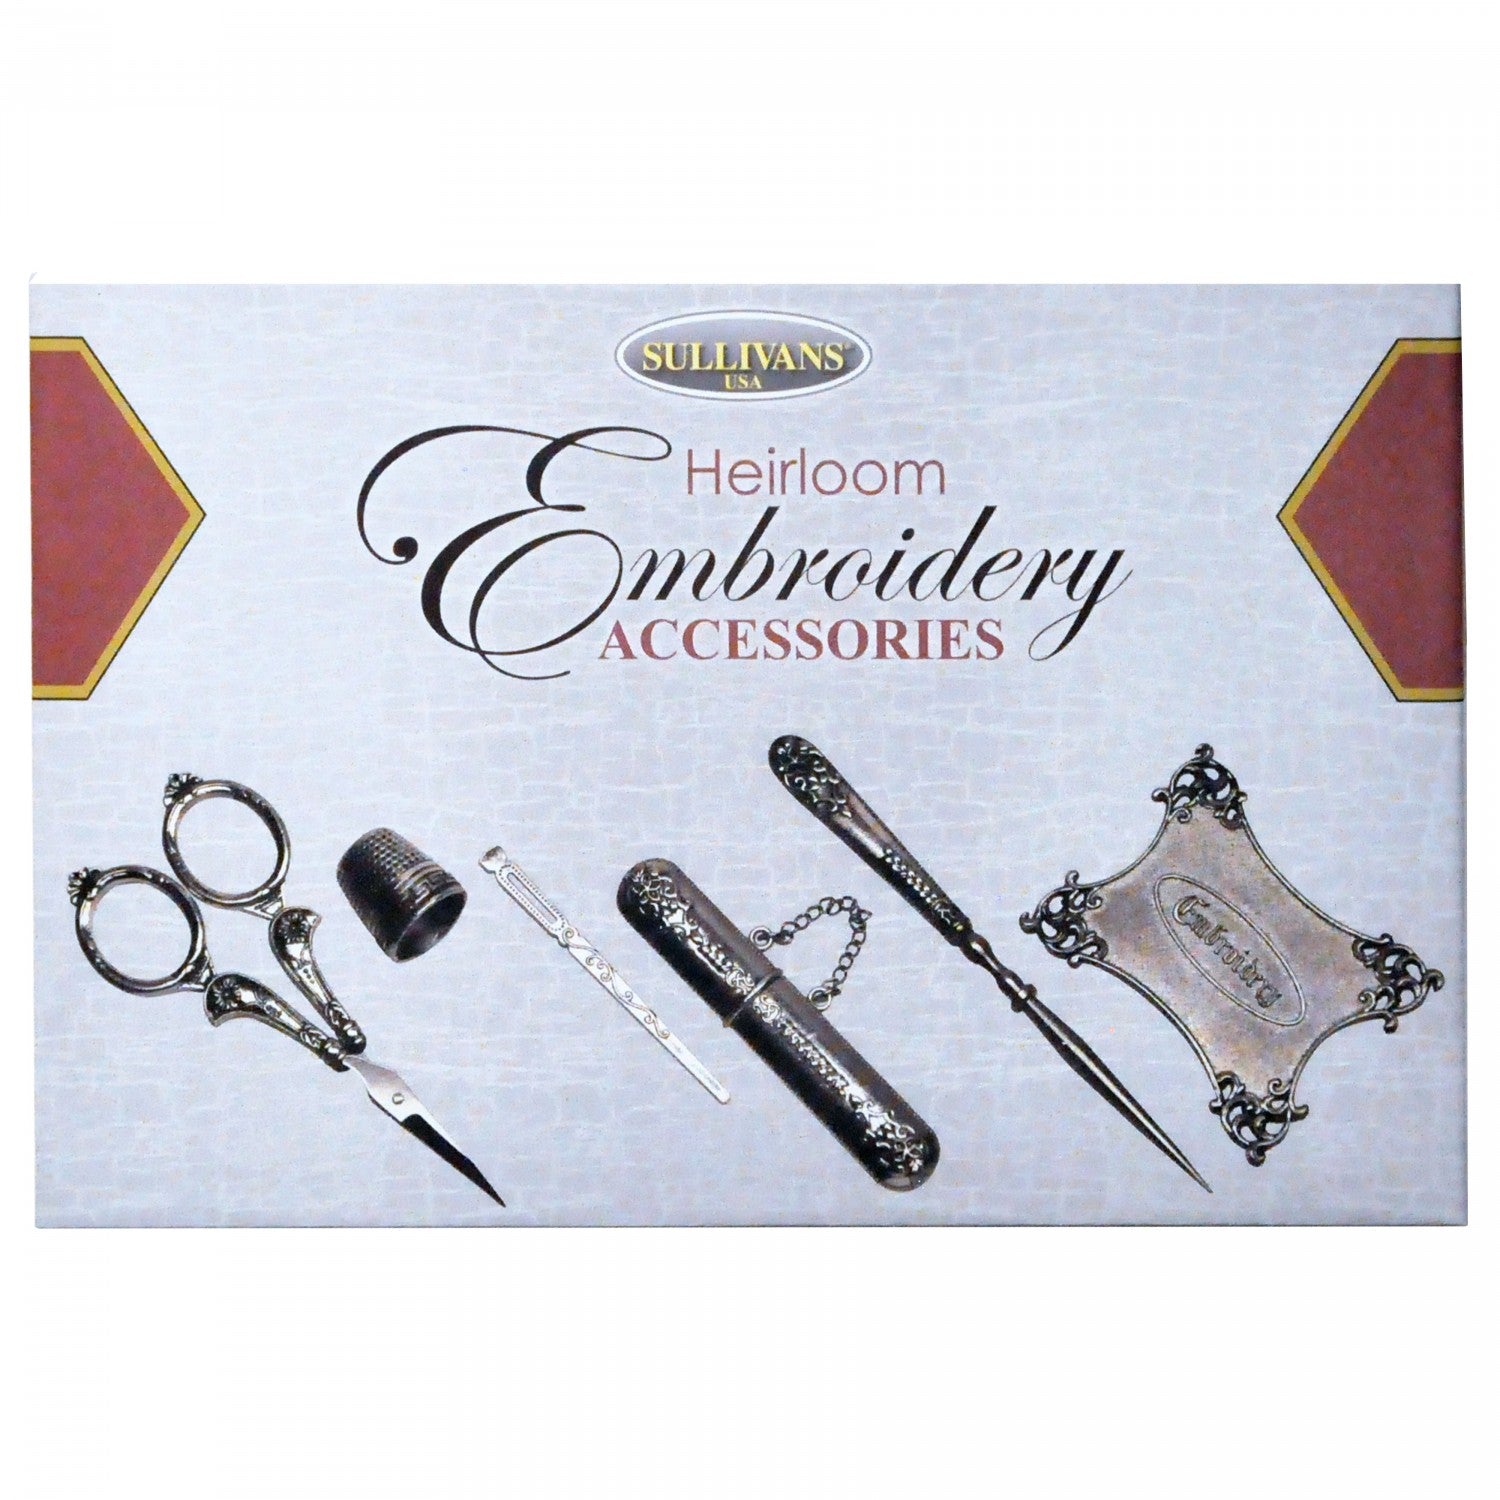 Embroidery tools